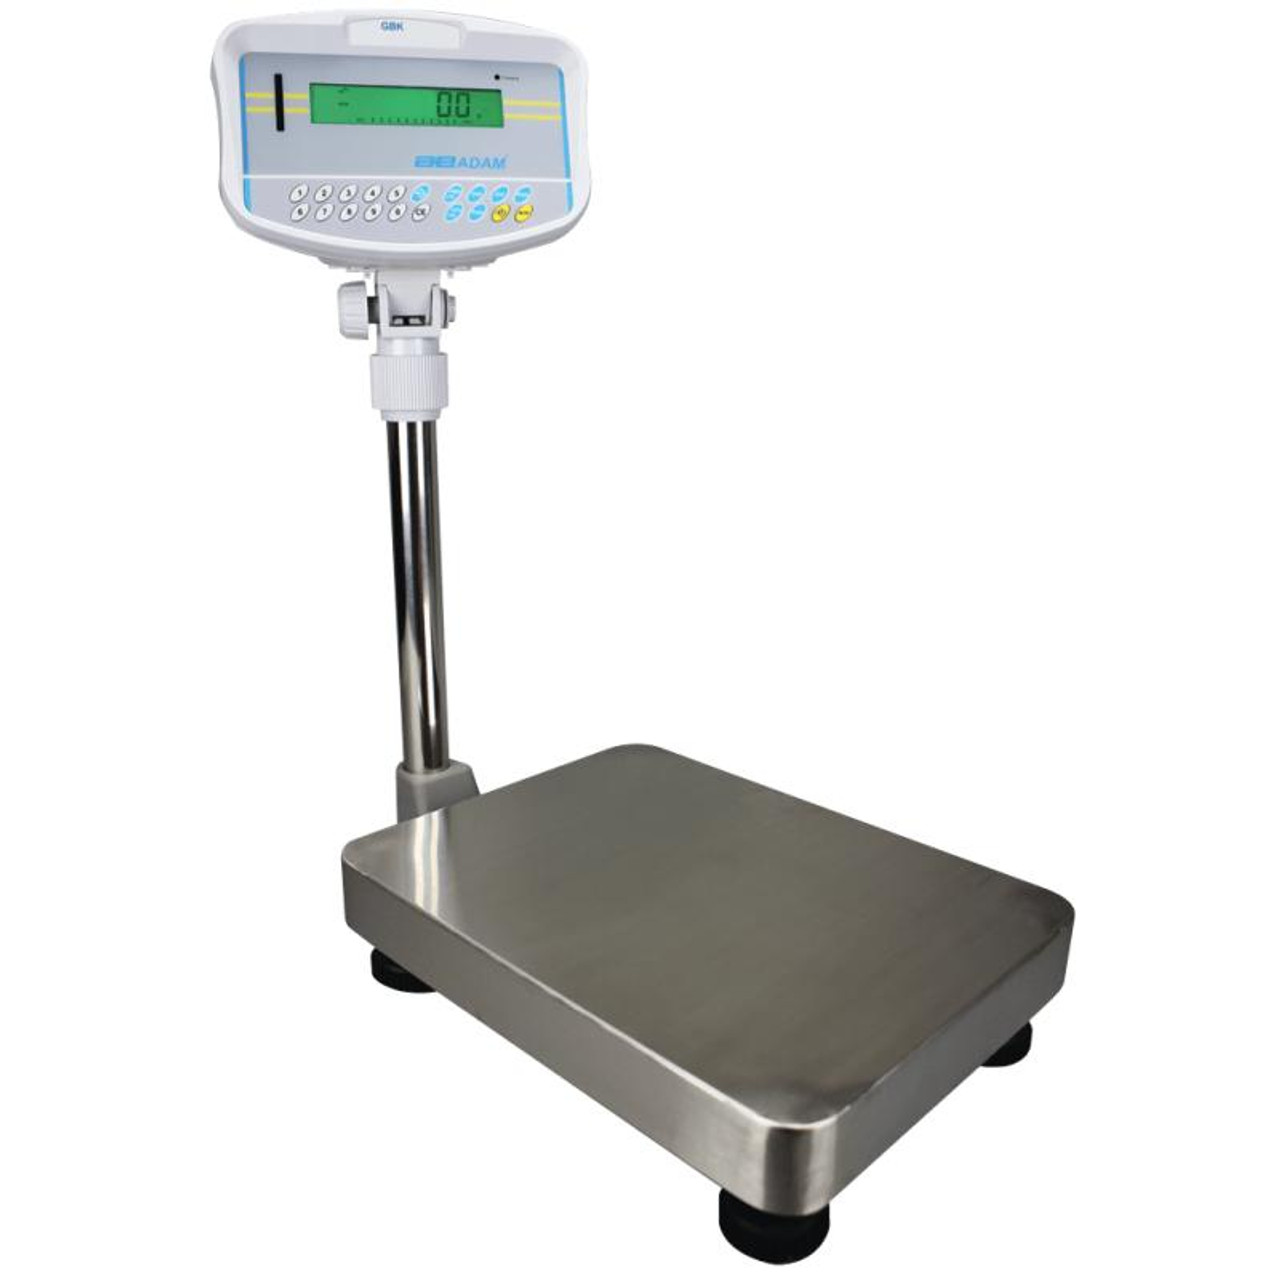 Adam Equipment GBK 70a Bench Checkweighing Scale Scales Plus